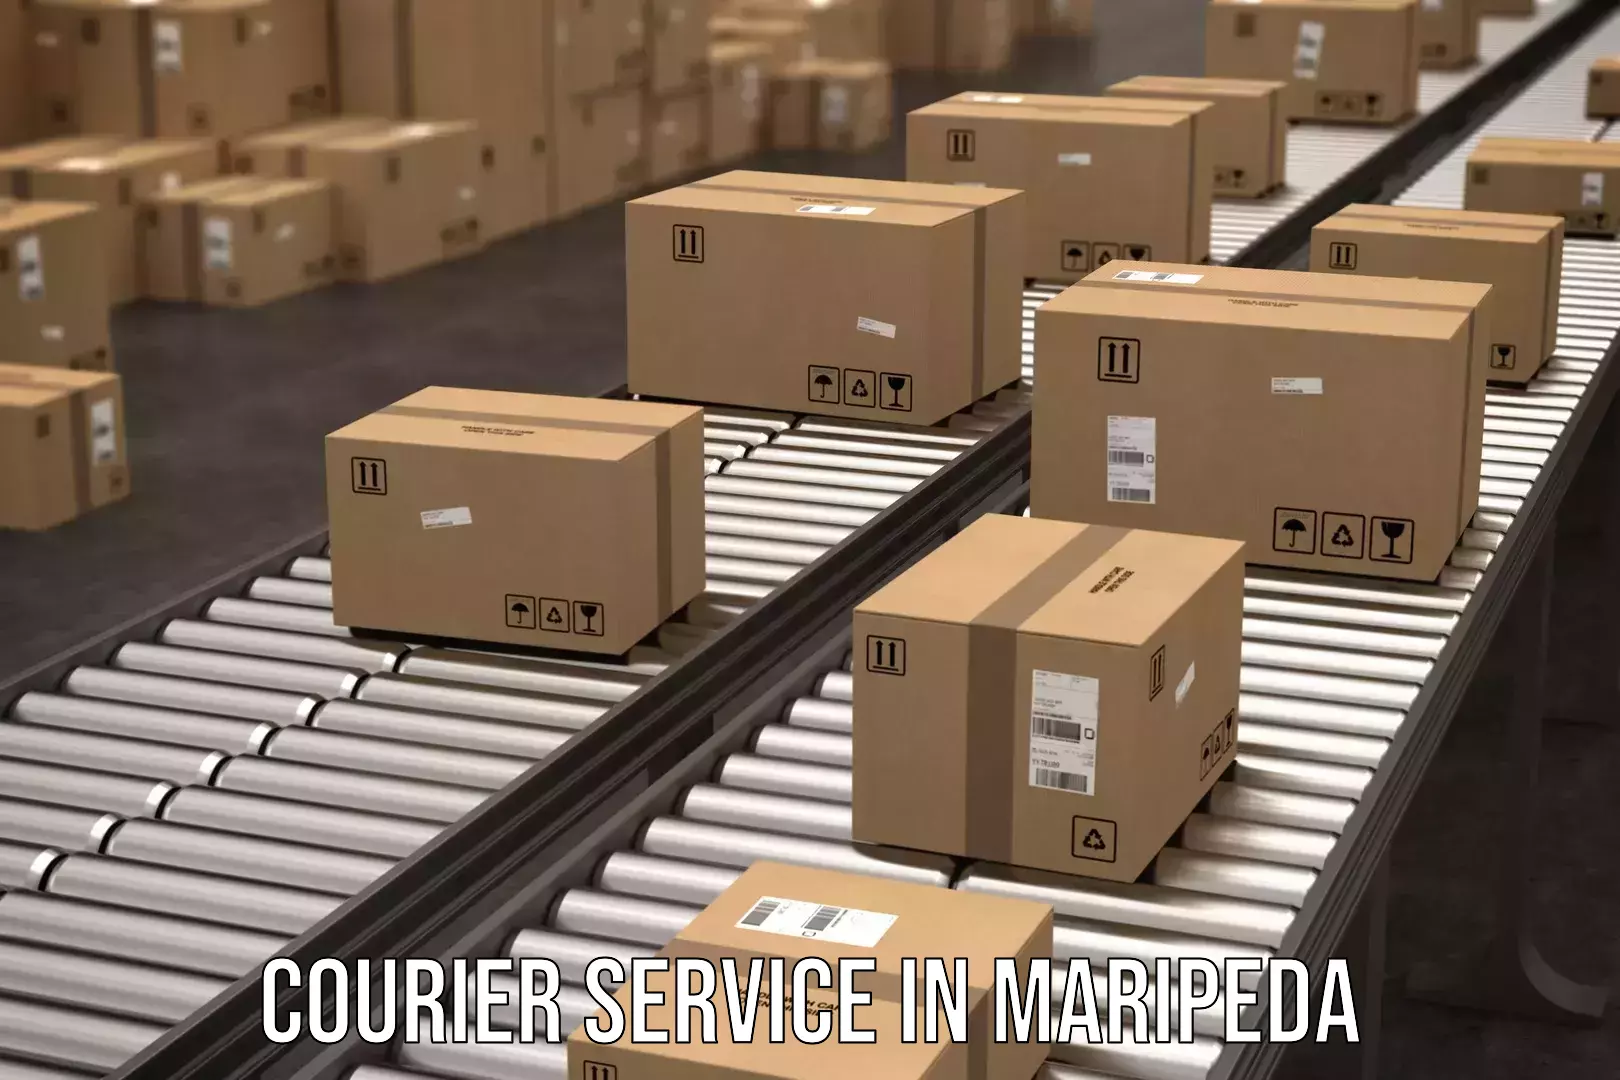 Expedited shipping methods in Maripeda